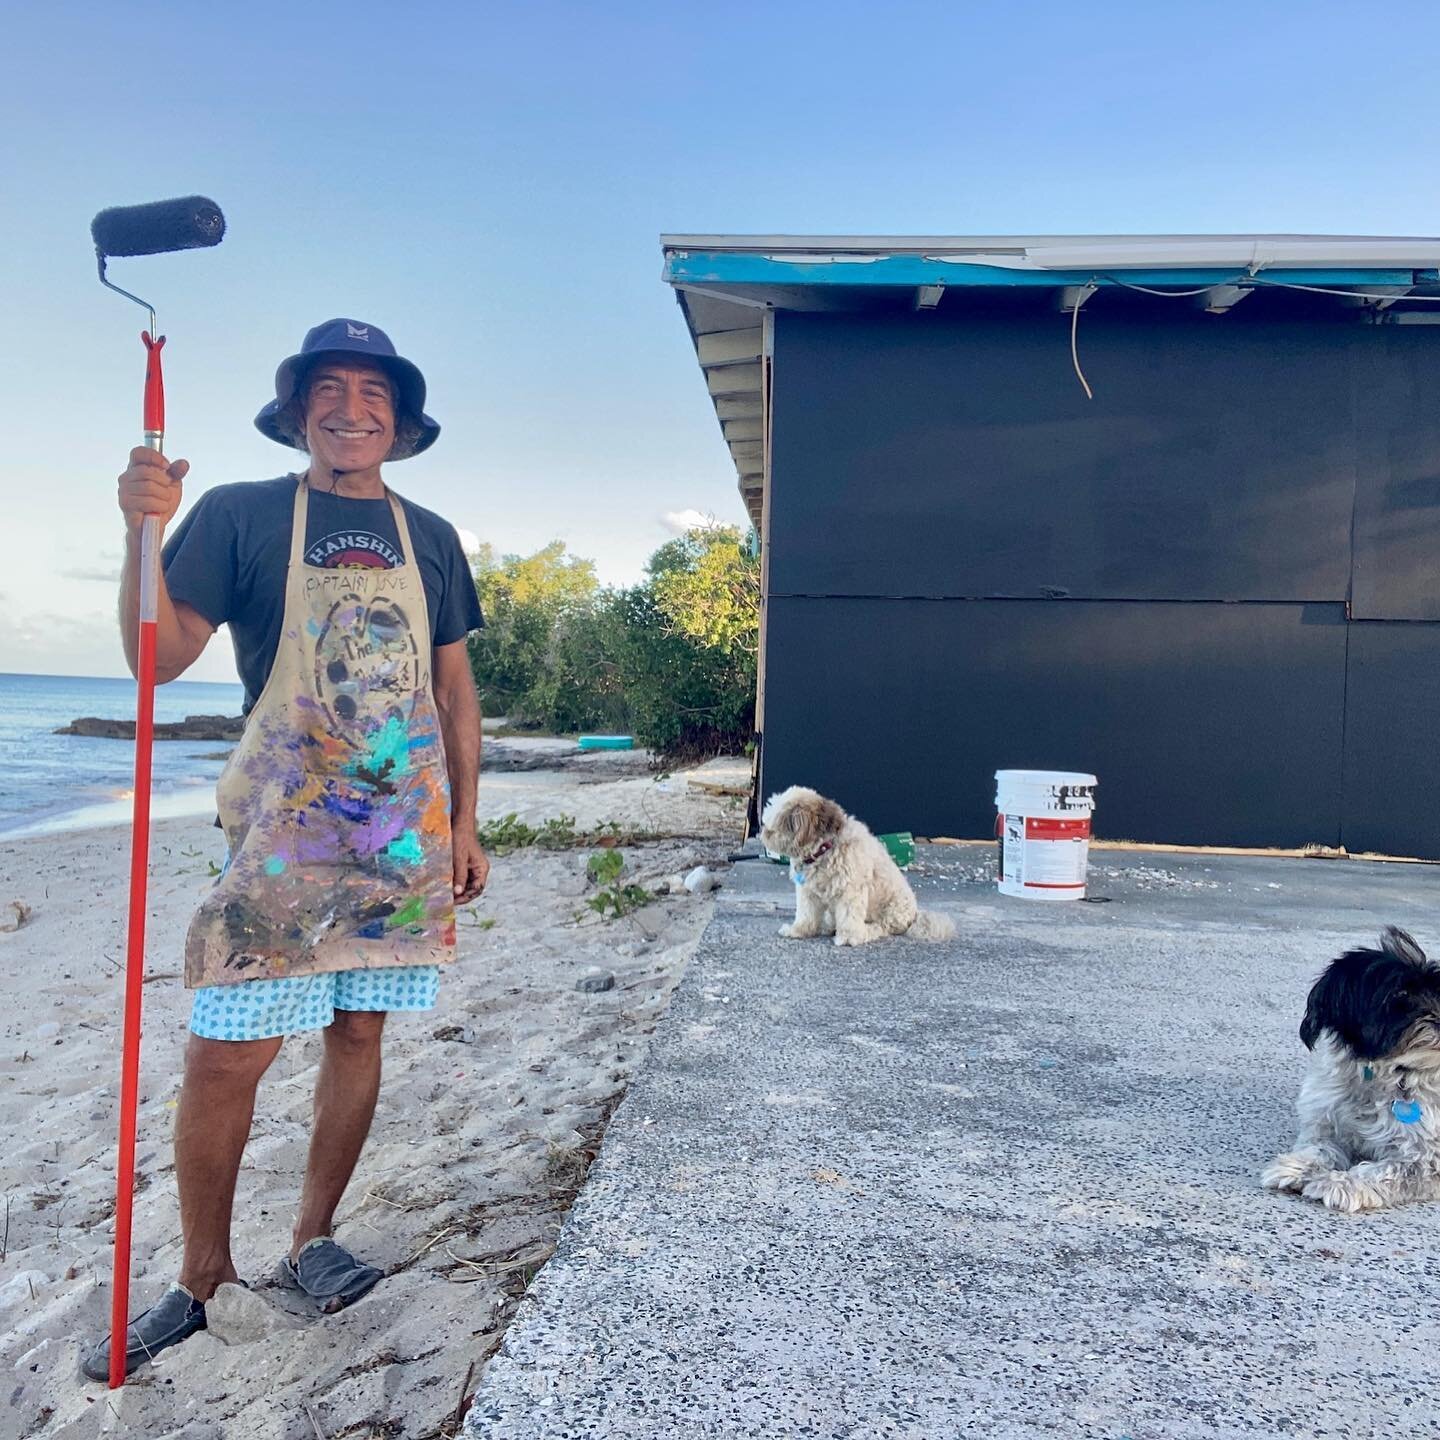 Meet Loops Beach Founder and Artist, Rudy Seikaly! ❤️🏄&zwj;♂️👷&zwj;♂️👨&zwj;🎨🎨 @rudyseikaly 

Rudy is a School Builder, Philanthropist, Creative Director, Entrepreneur, and the best Vibe Curator we know! 

Rudy named the beach after his son, Chri